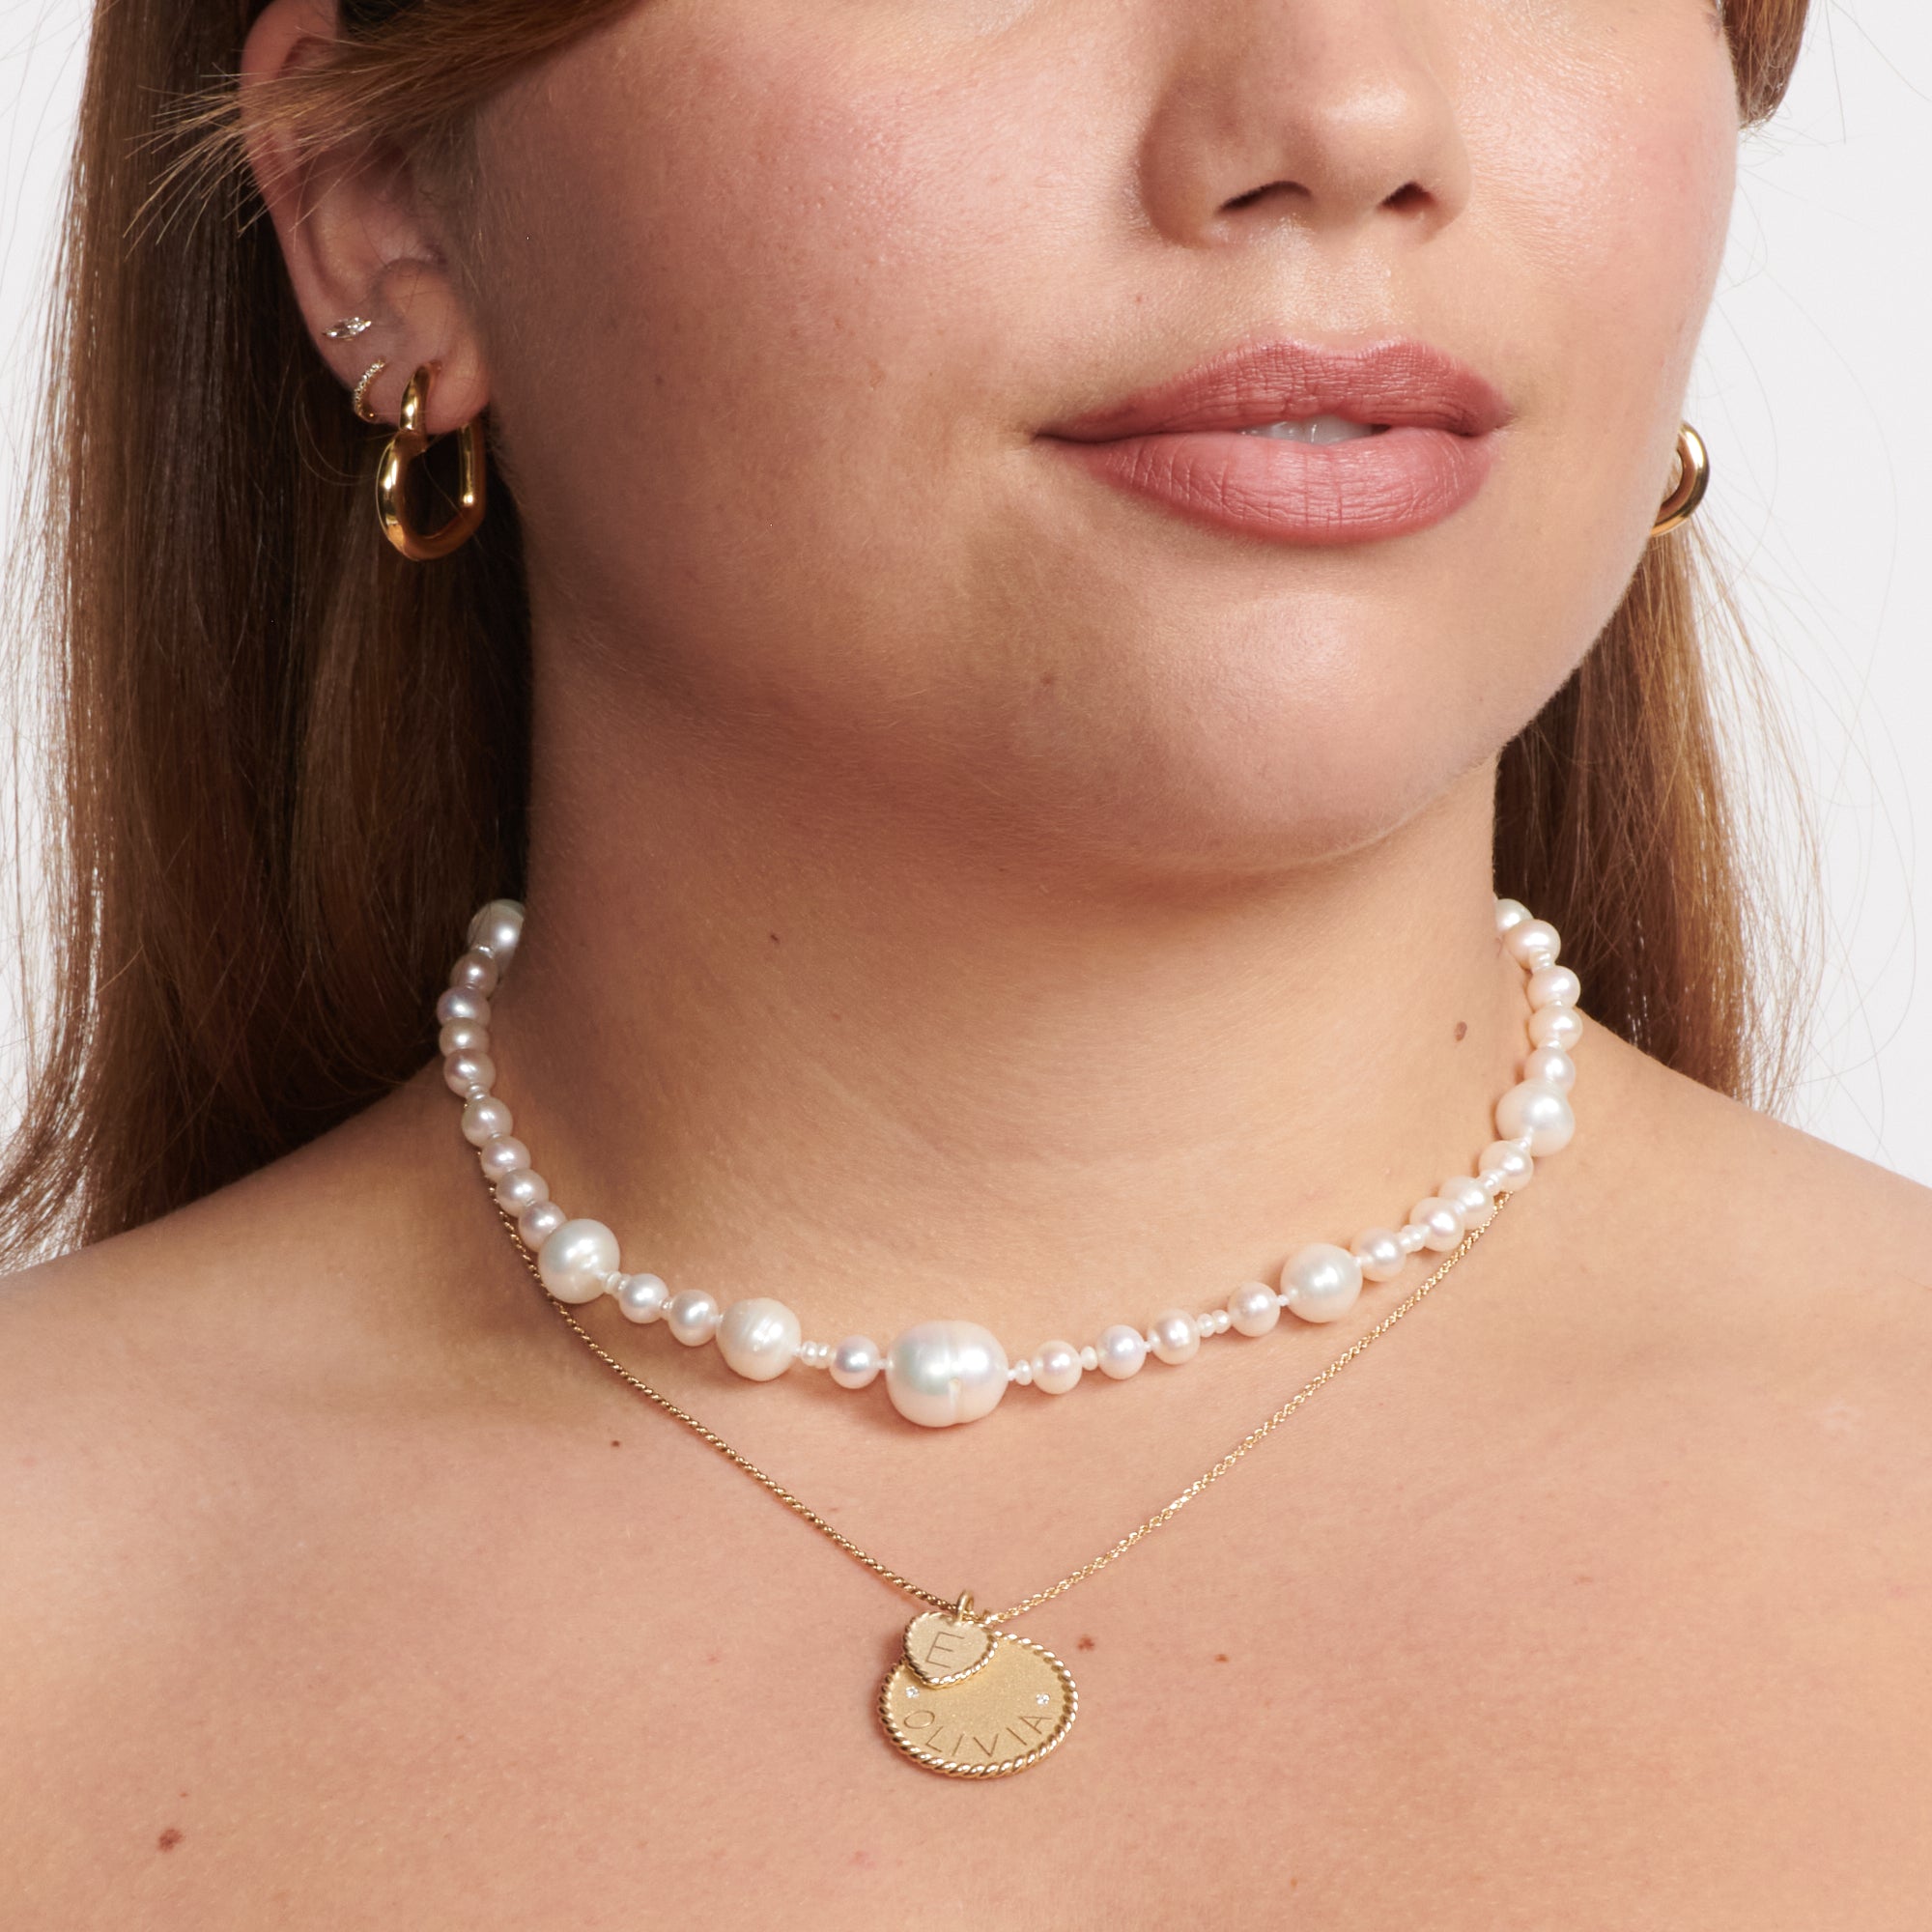 A woman wearing a Pearl sundry necklace together with another gold plated necklace